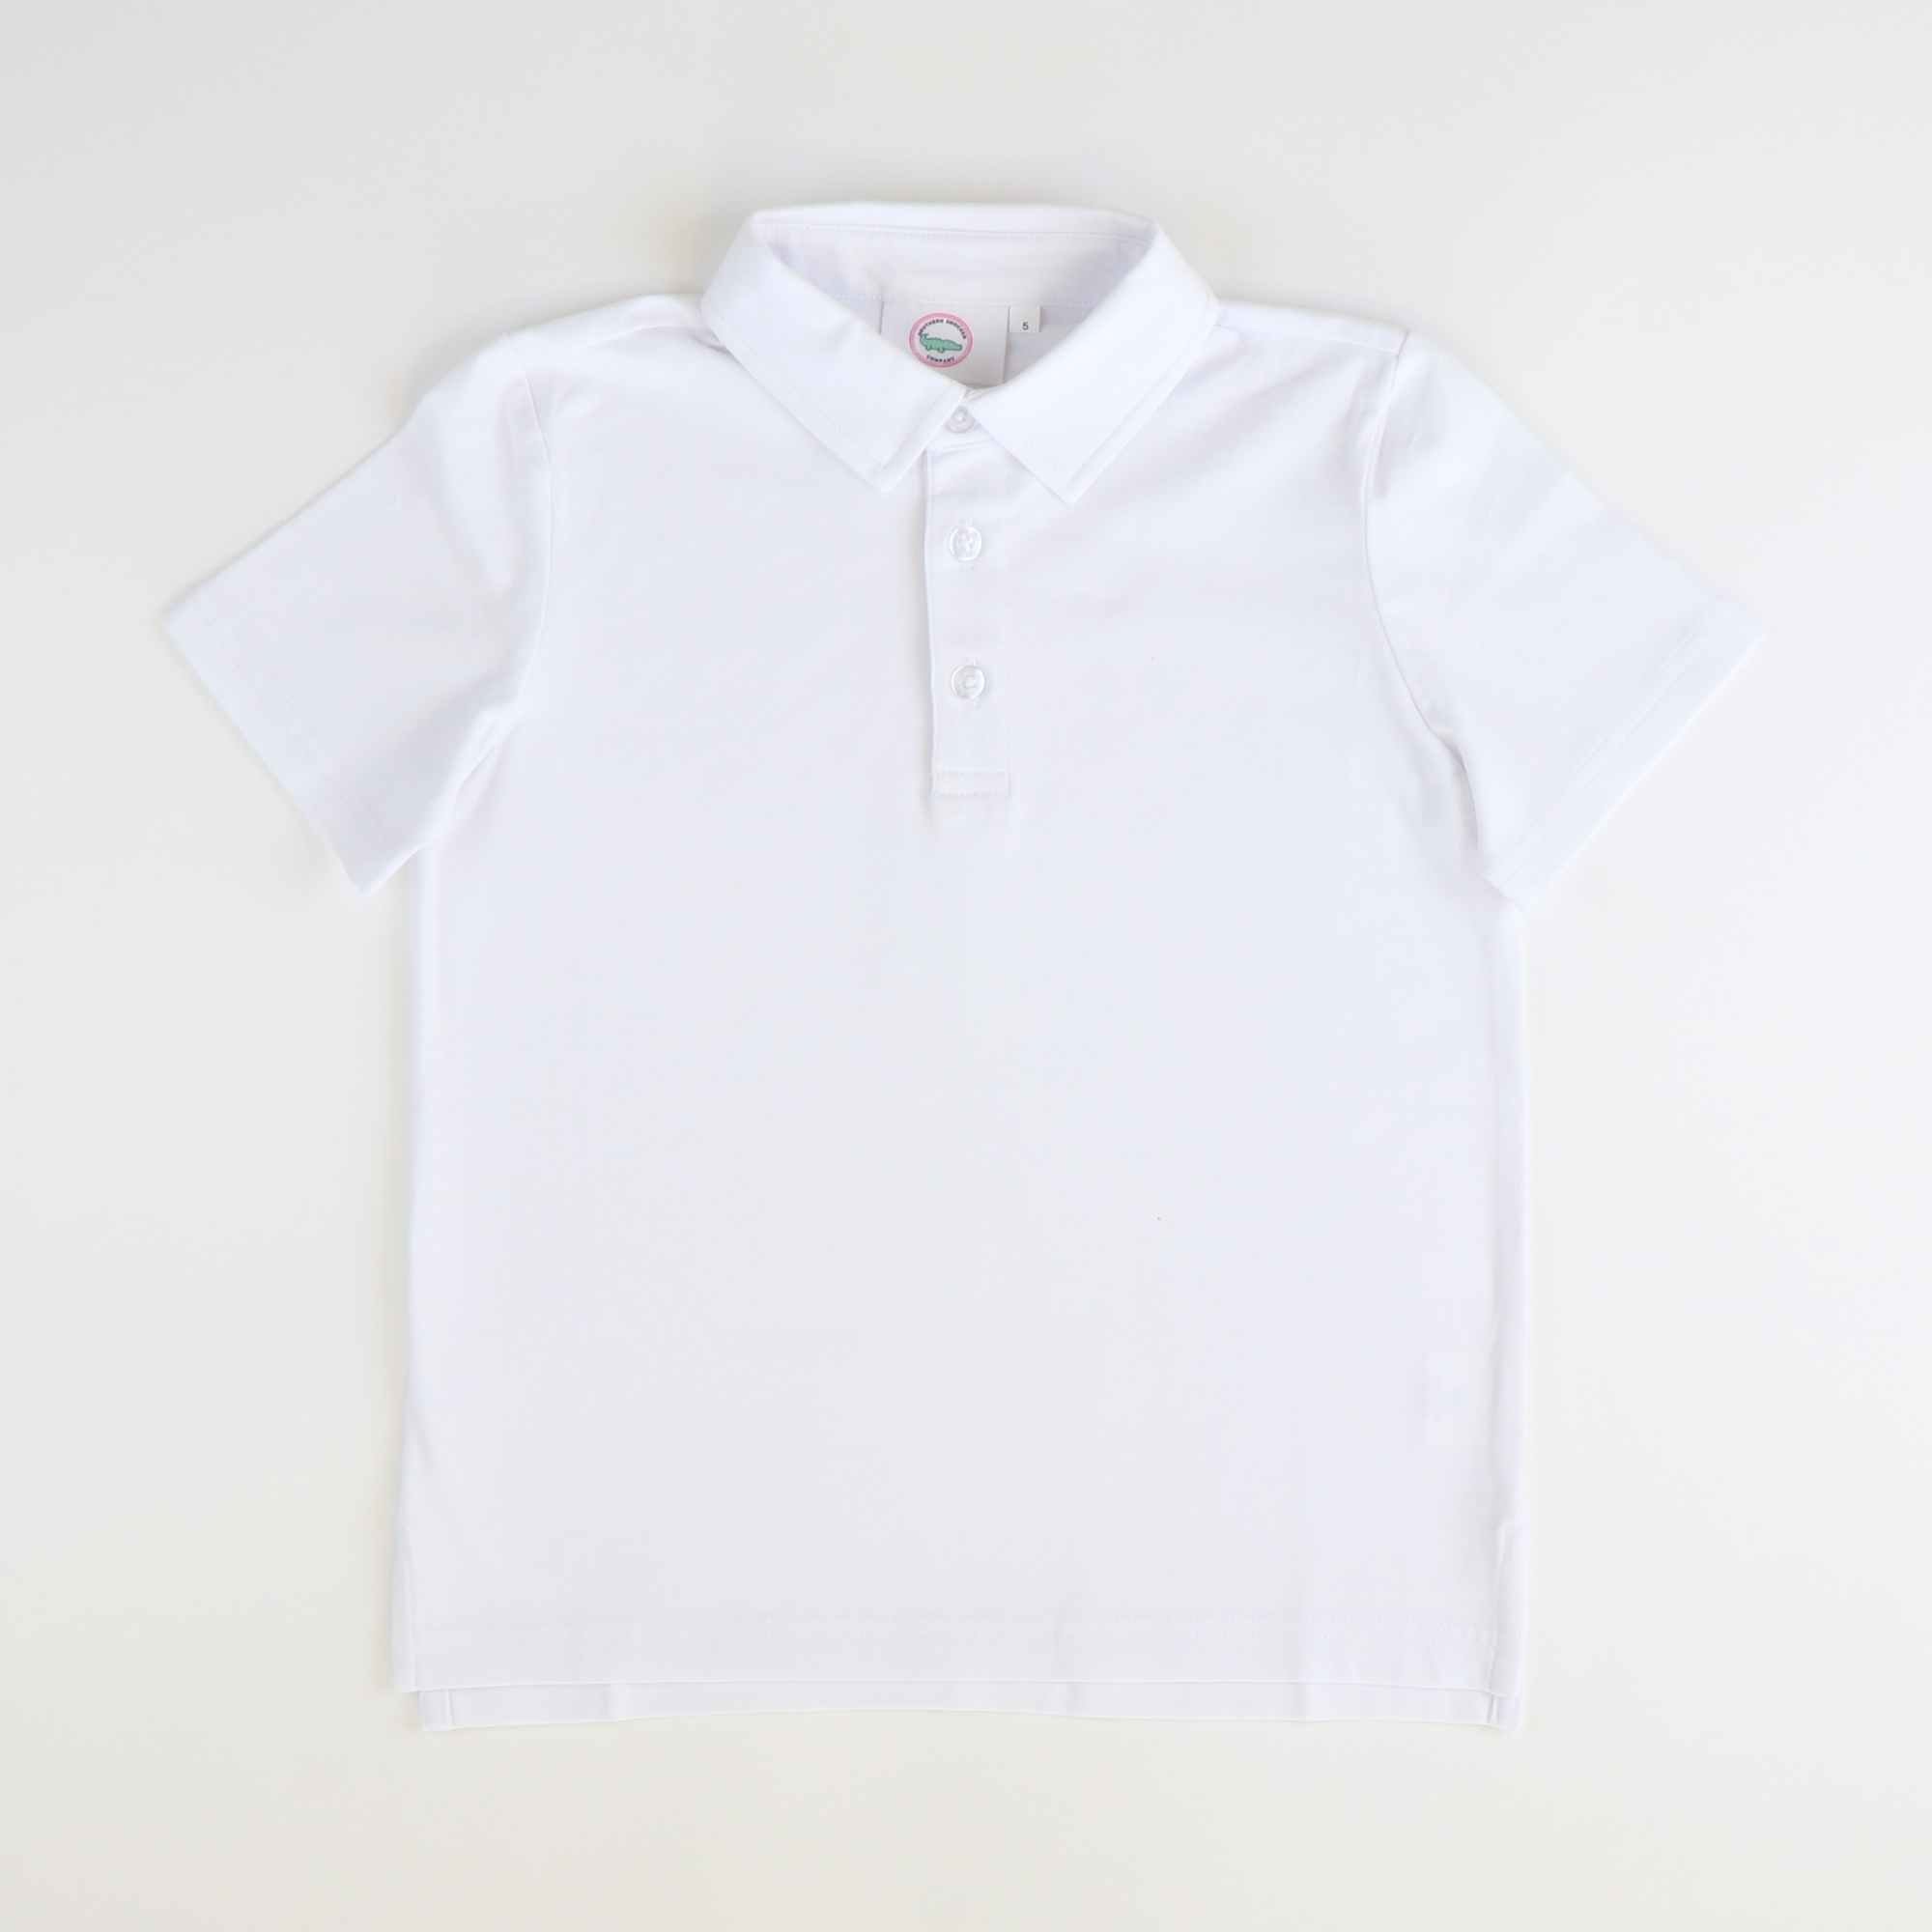 Boys Signature S/S Knit Polo - White Solid